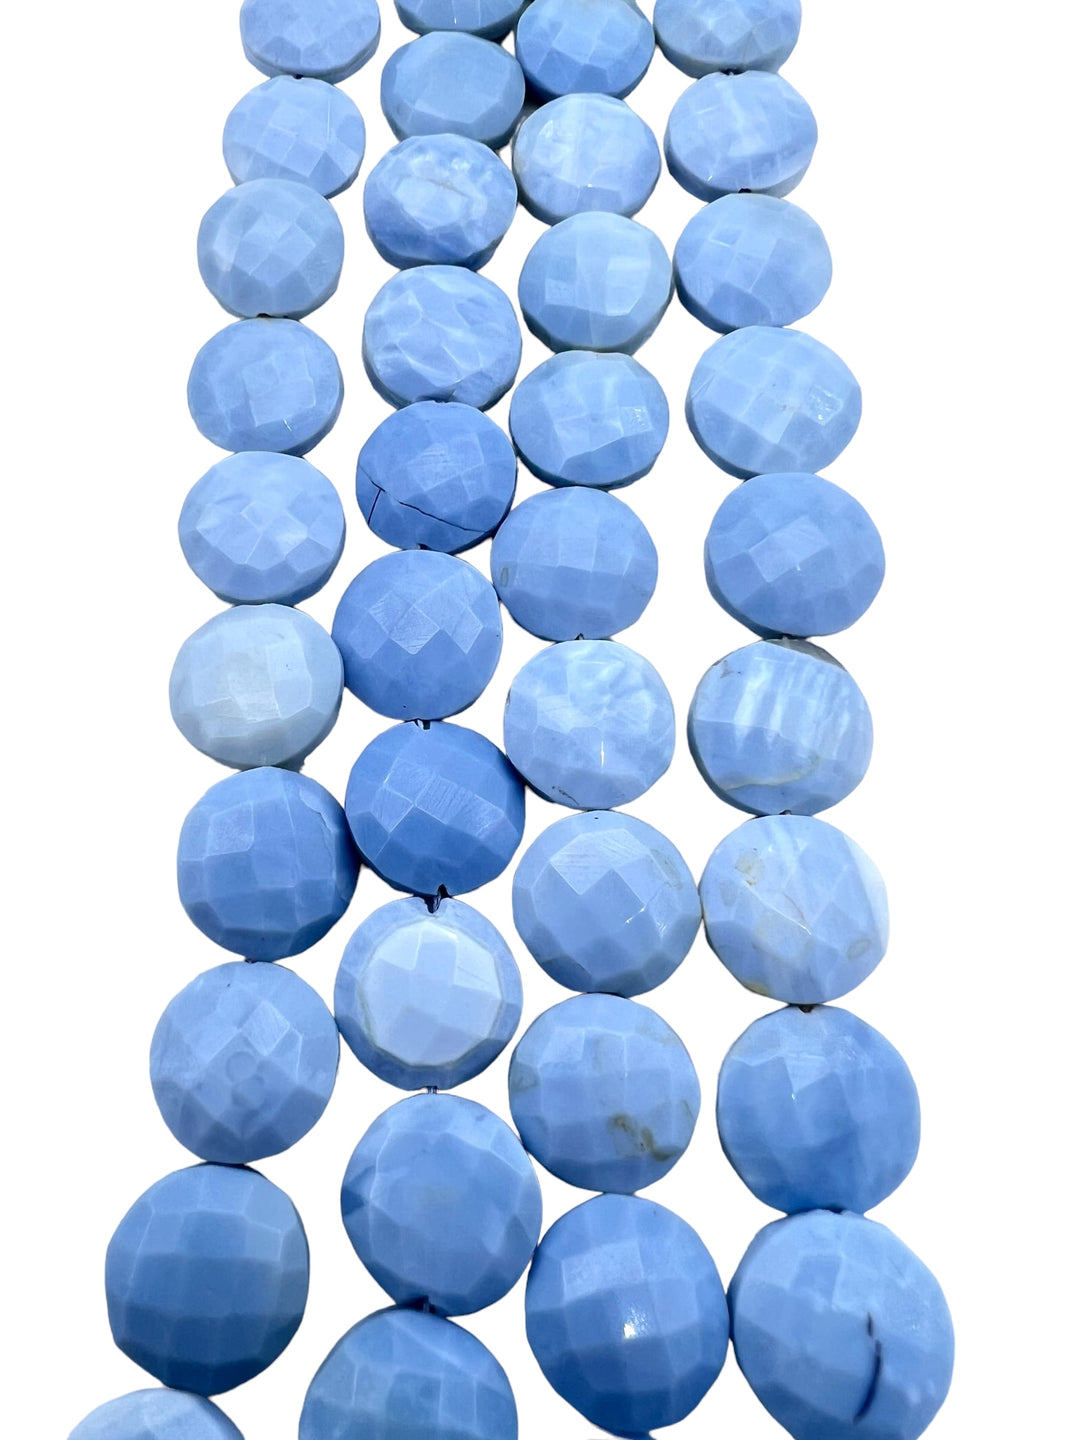 Owyhee Blue Opal (Oregon) 14mm Faceted Coin Beads (8 in